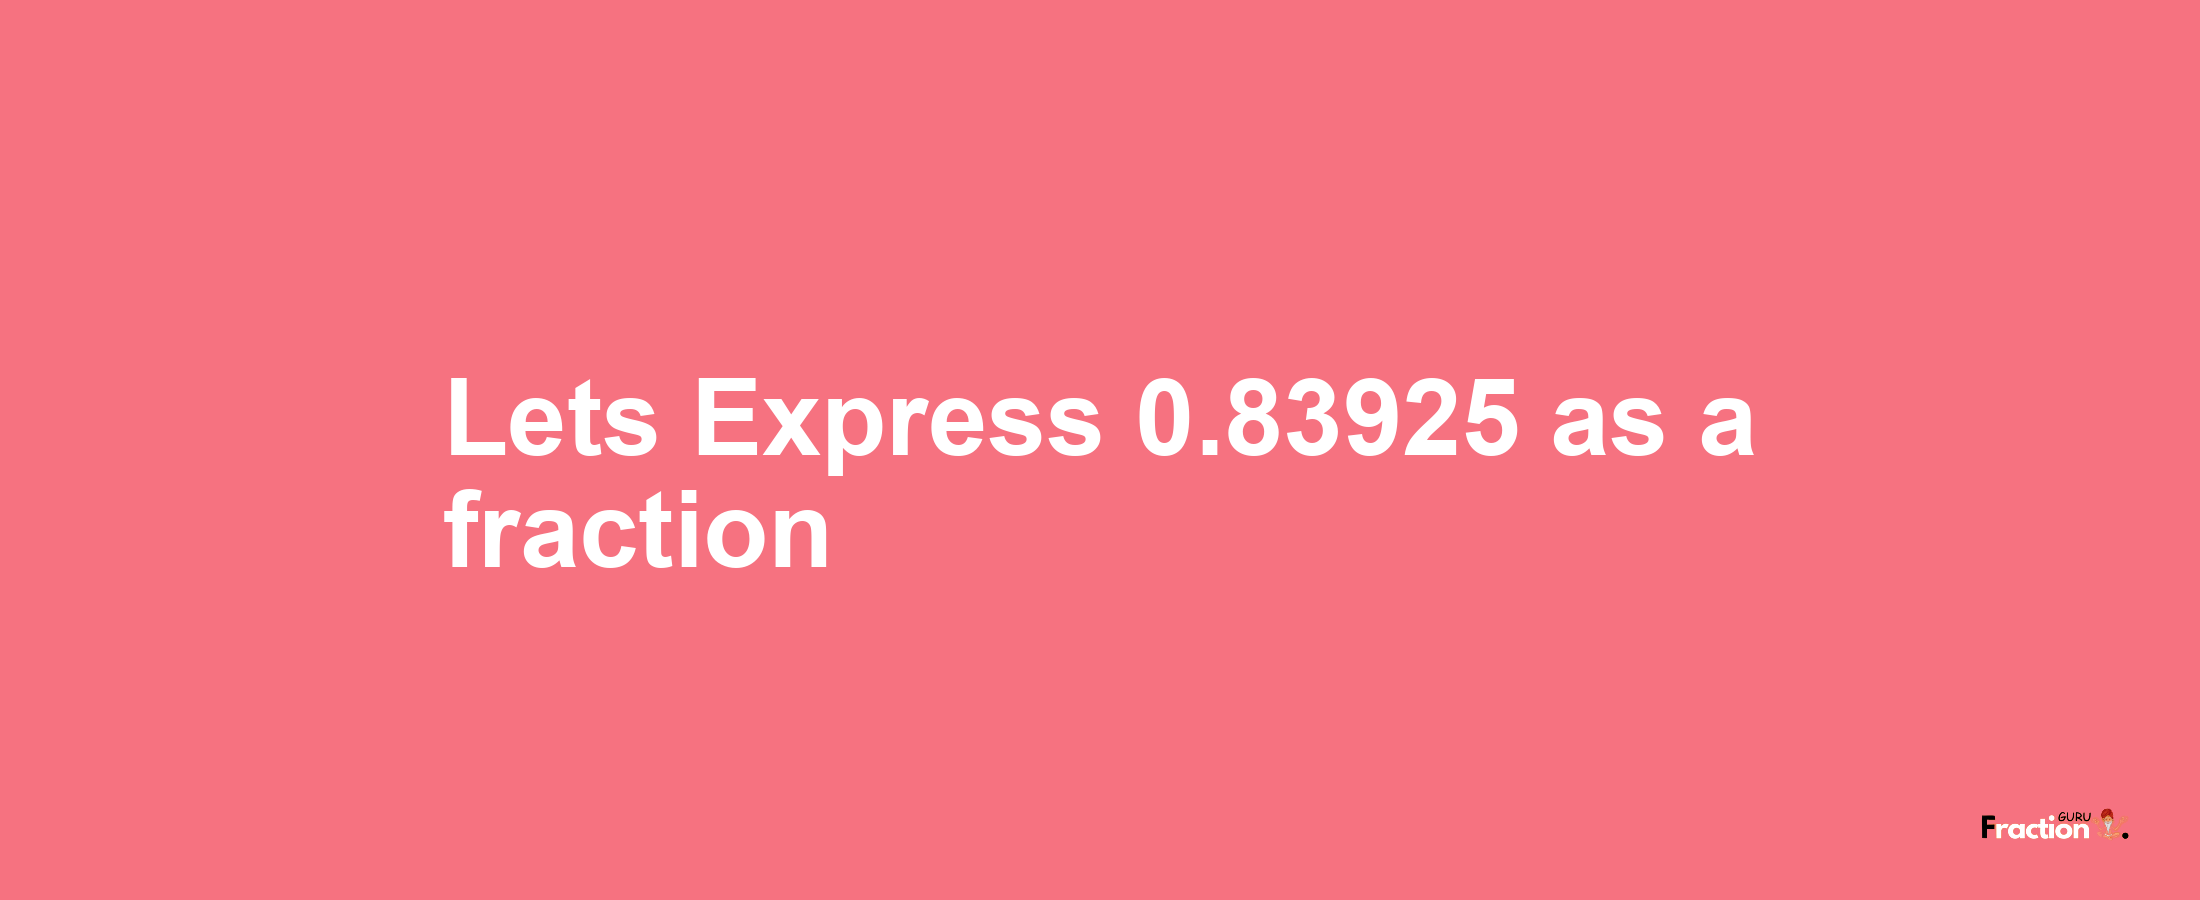 Lets Express 0.83925 as afraction